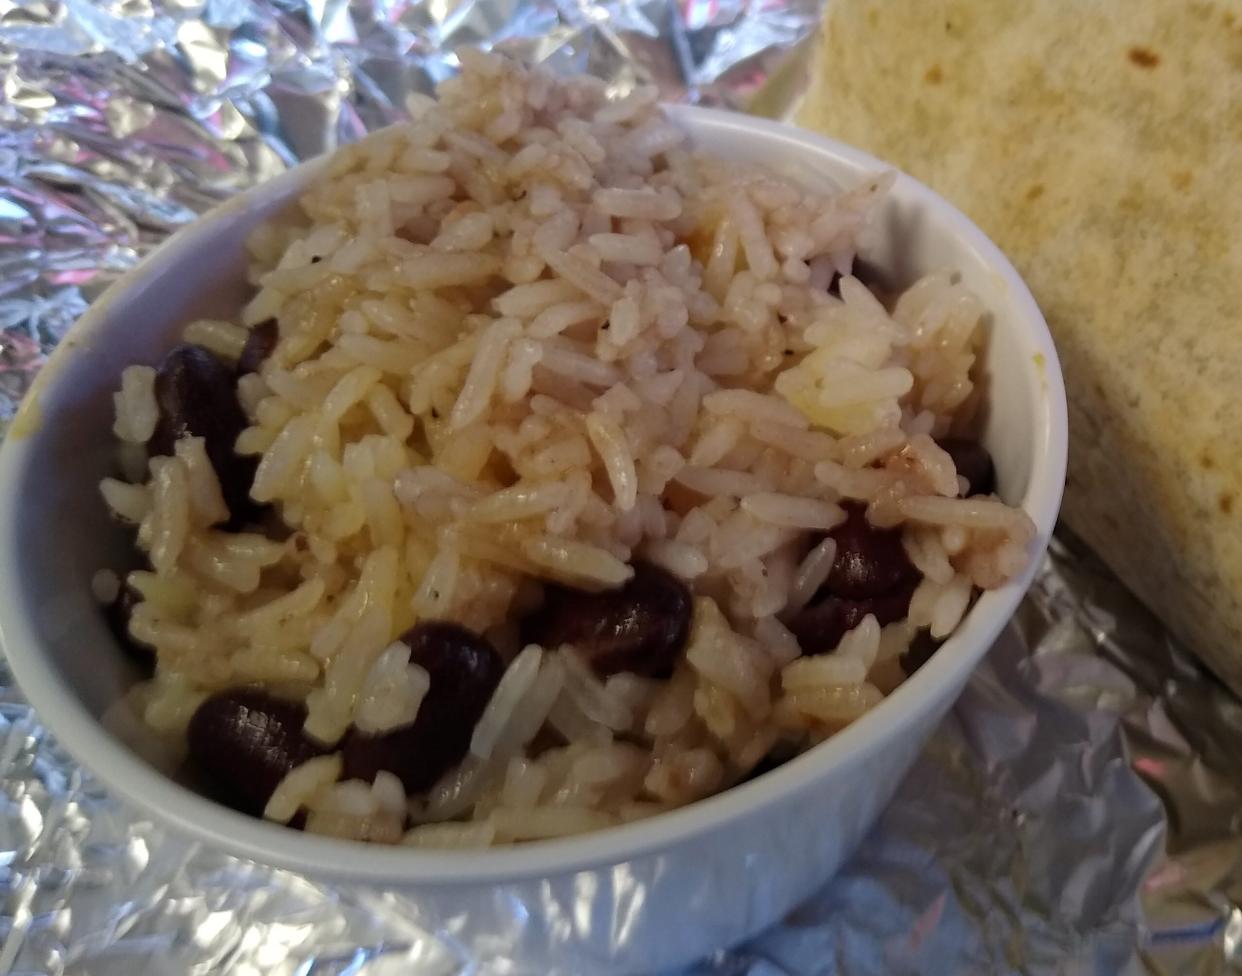 A side of red beans and rice is served at the Soulful Vegan in Akron.